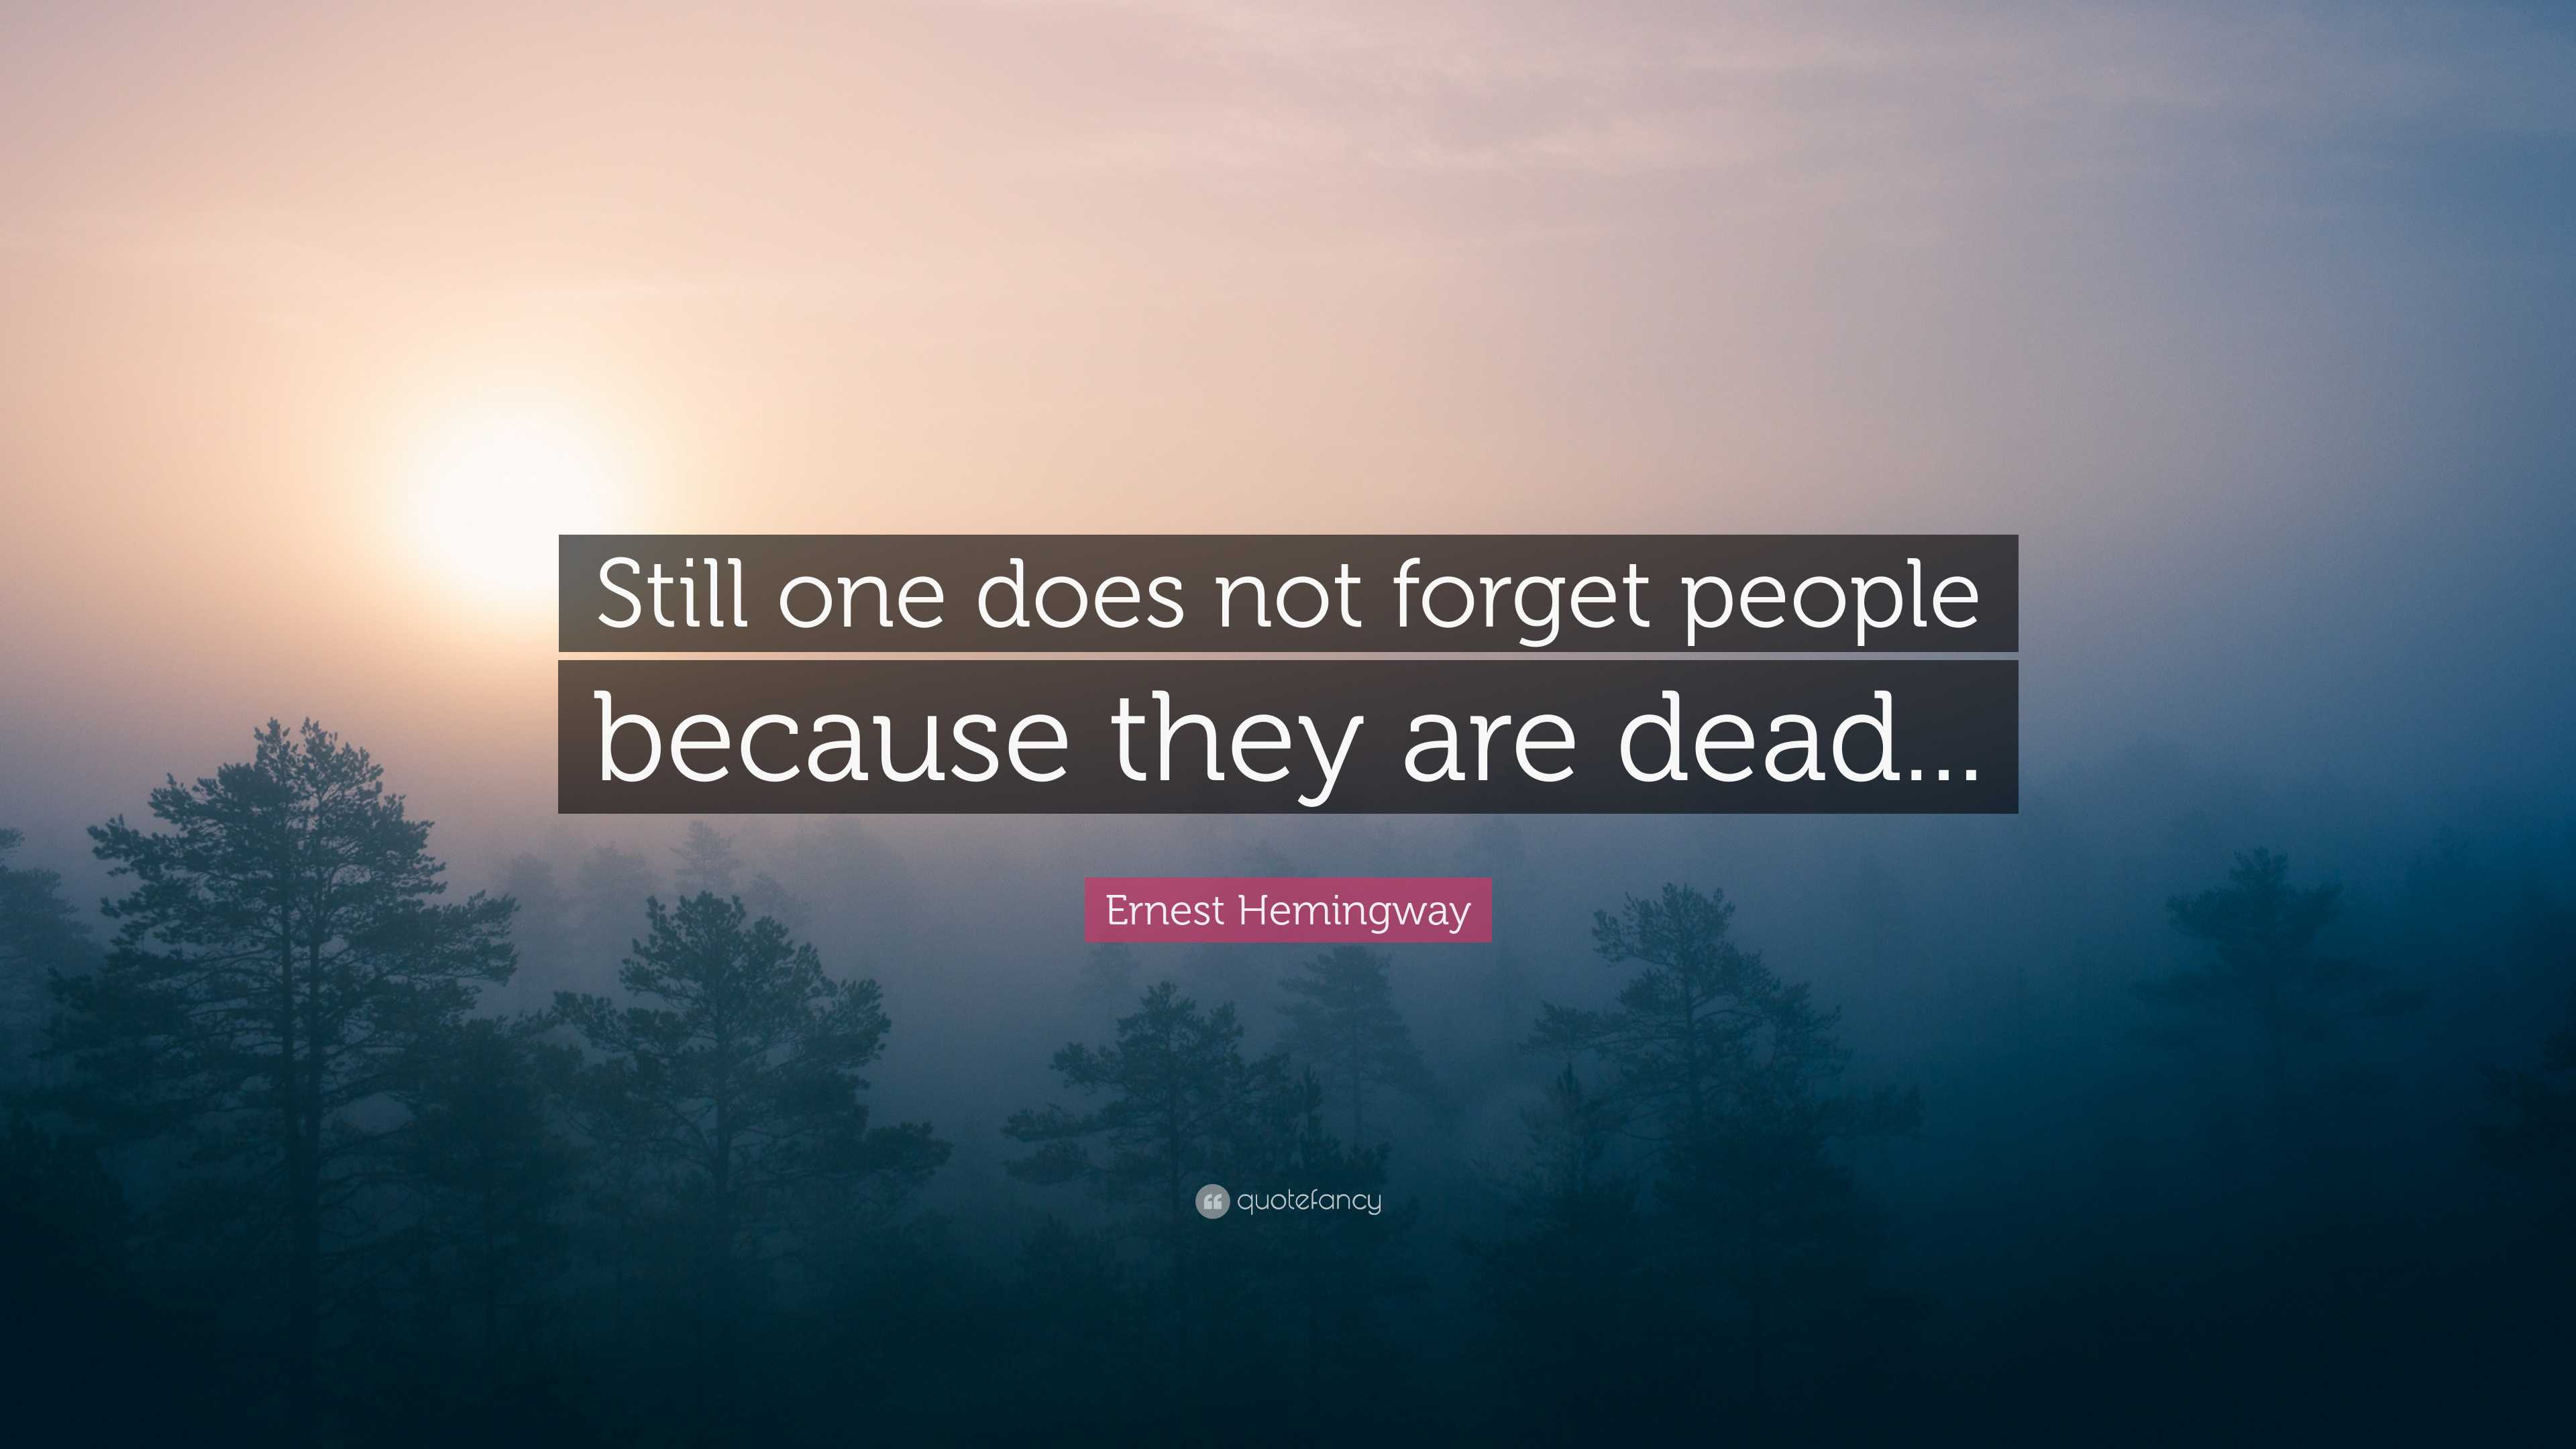 Ernest Hemingway Quote: “Still one does not forget people because they ...